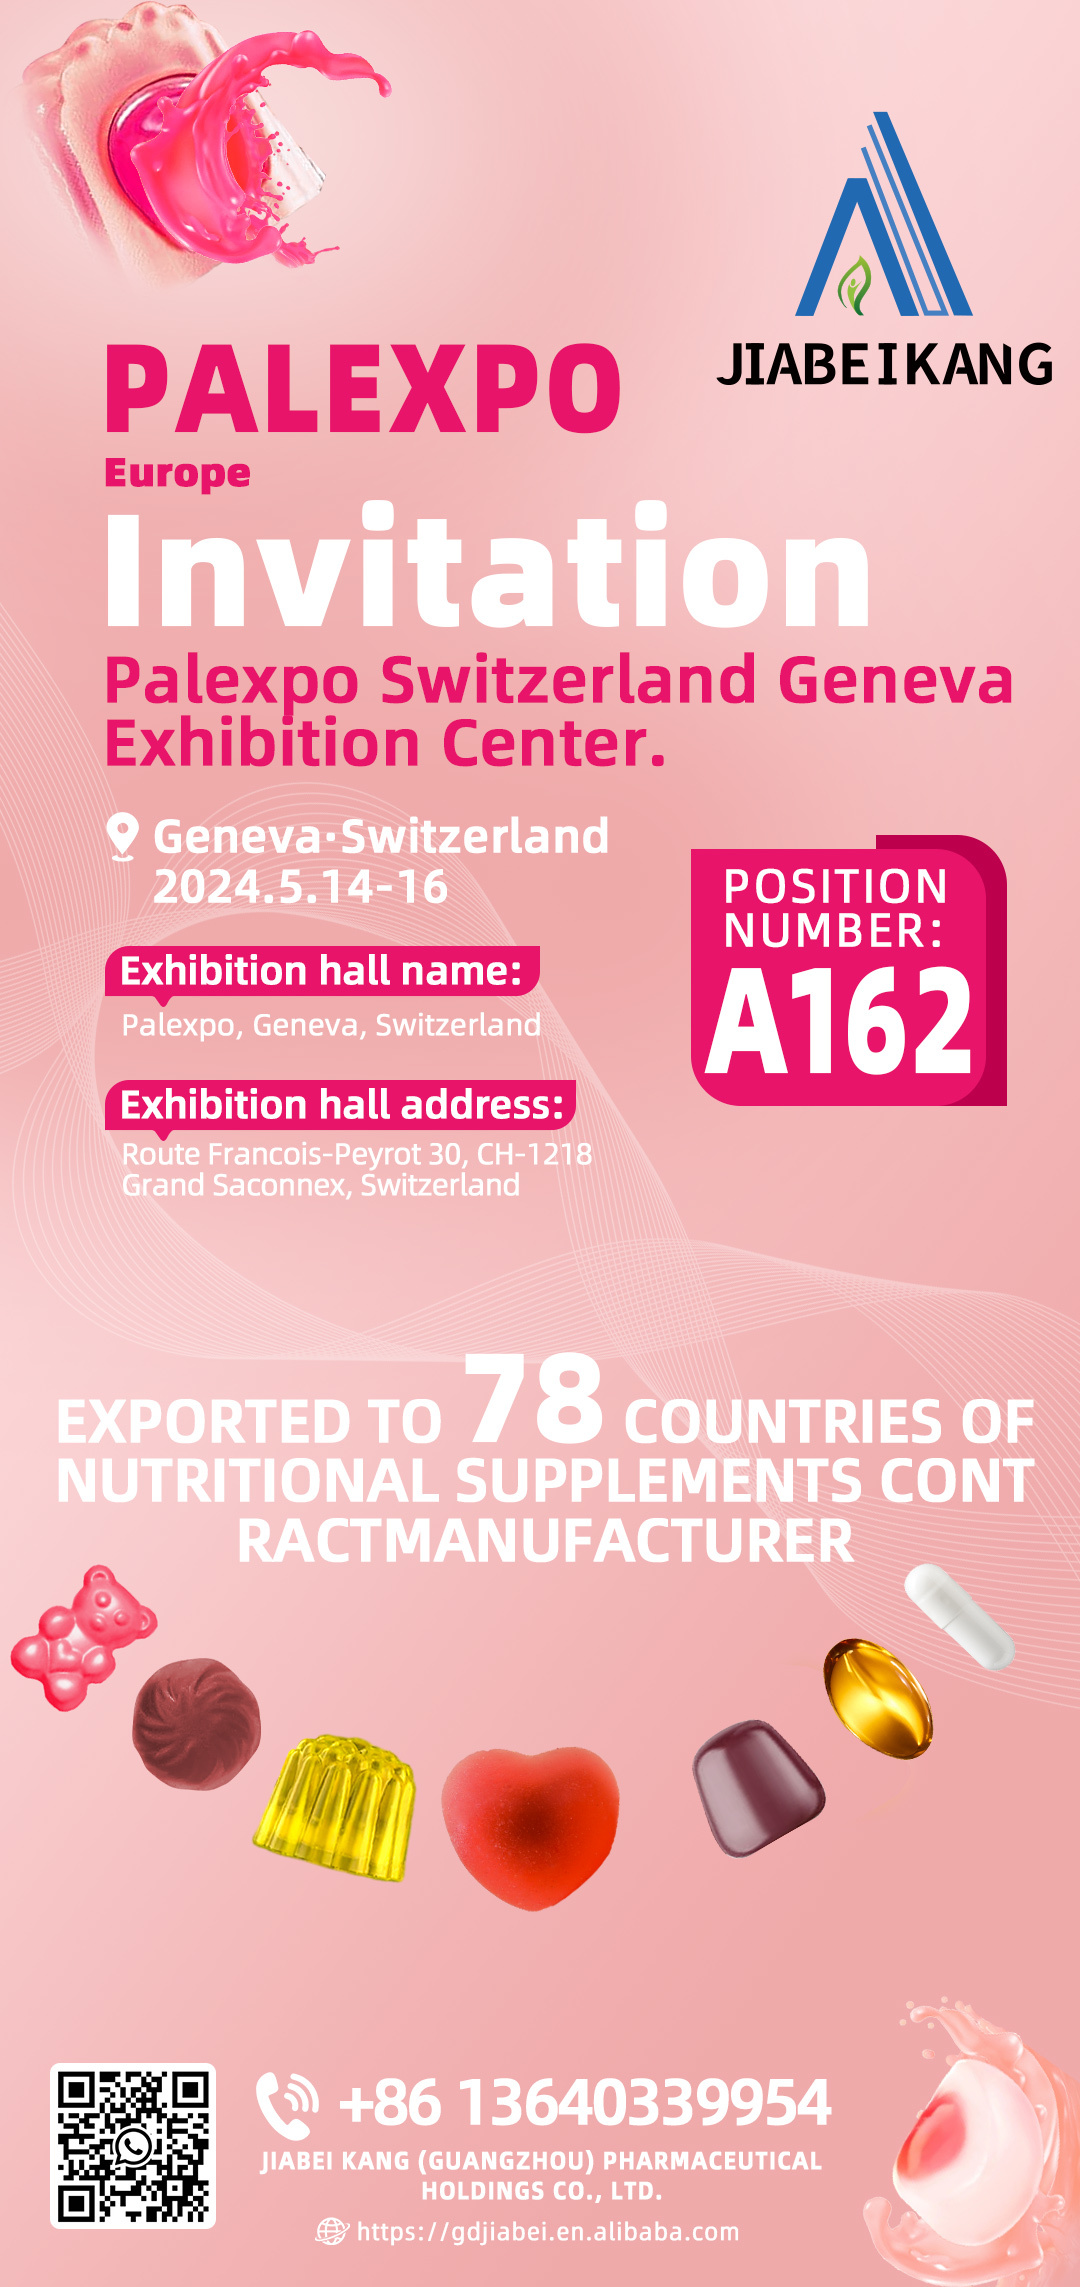 Jiabikang Health Research Institute will participate in the Palexpo Switzerland Geneva Exhibition in May 2024